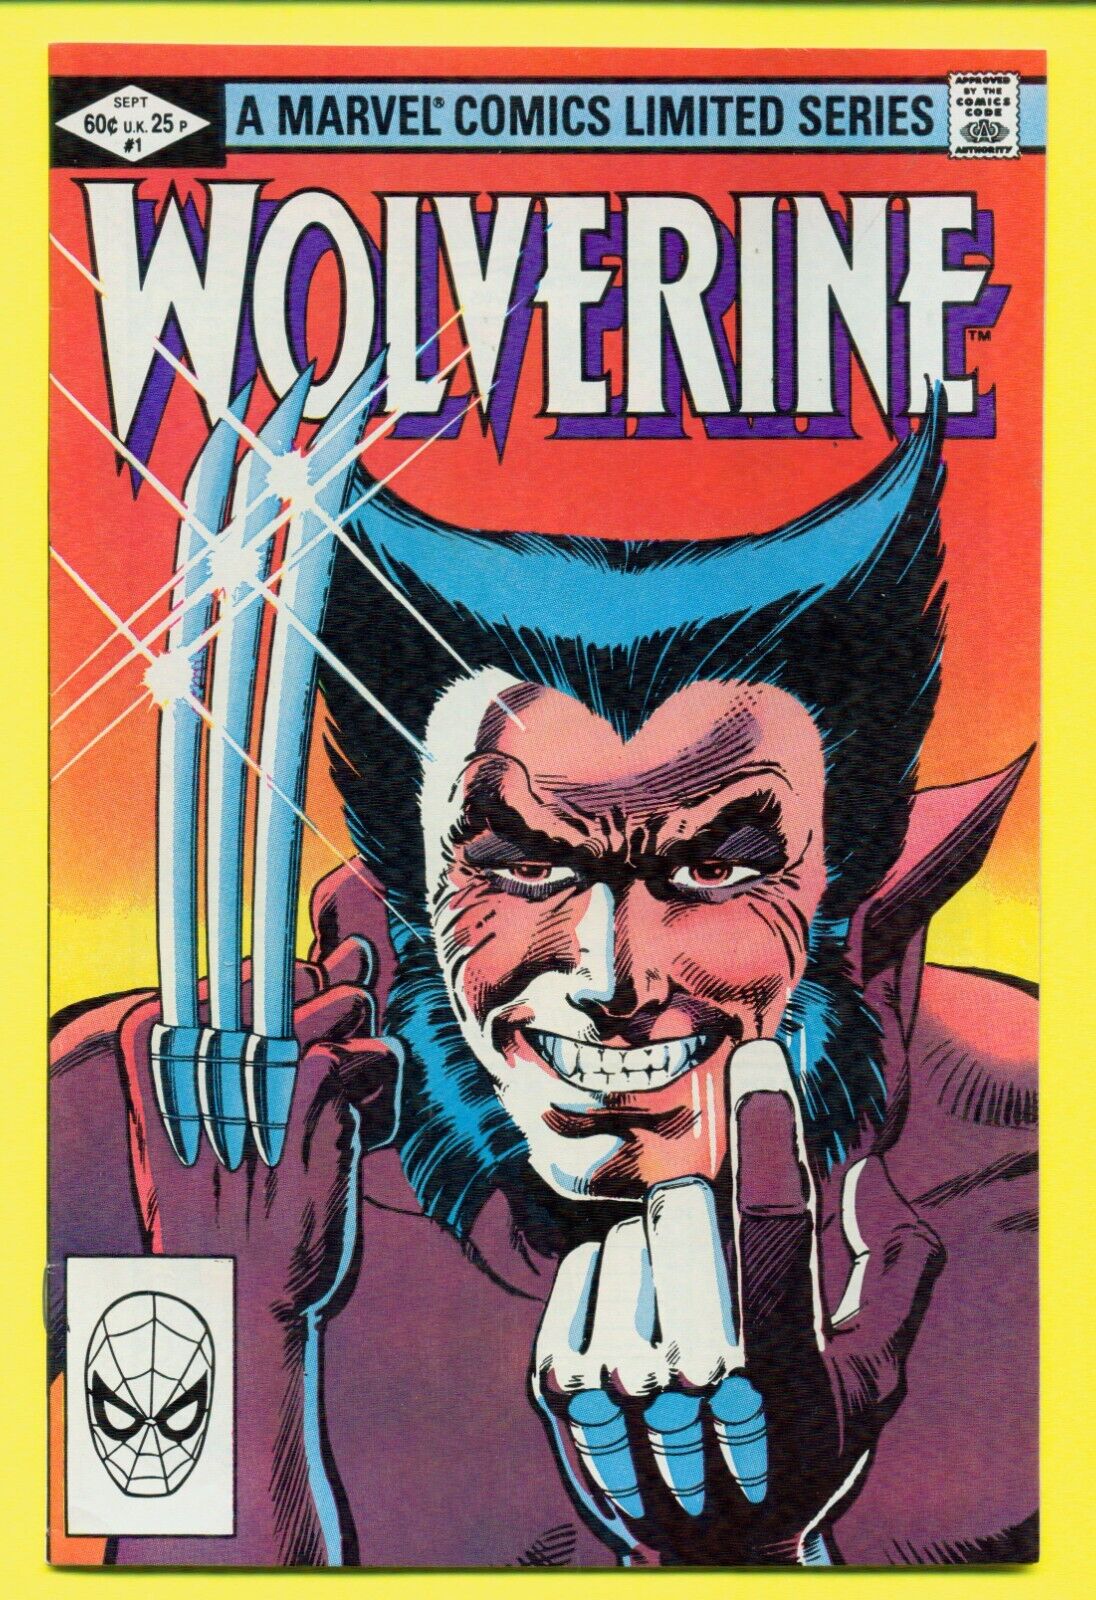 Wolverine #1-4 FULL RUN SEP -DEC 1982 1st Solo Limited Series Frank Miller L-310